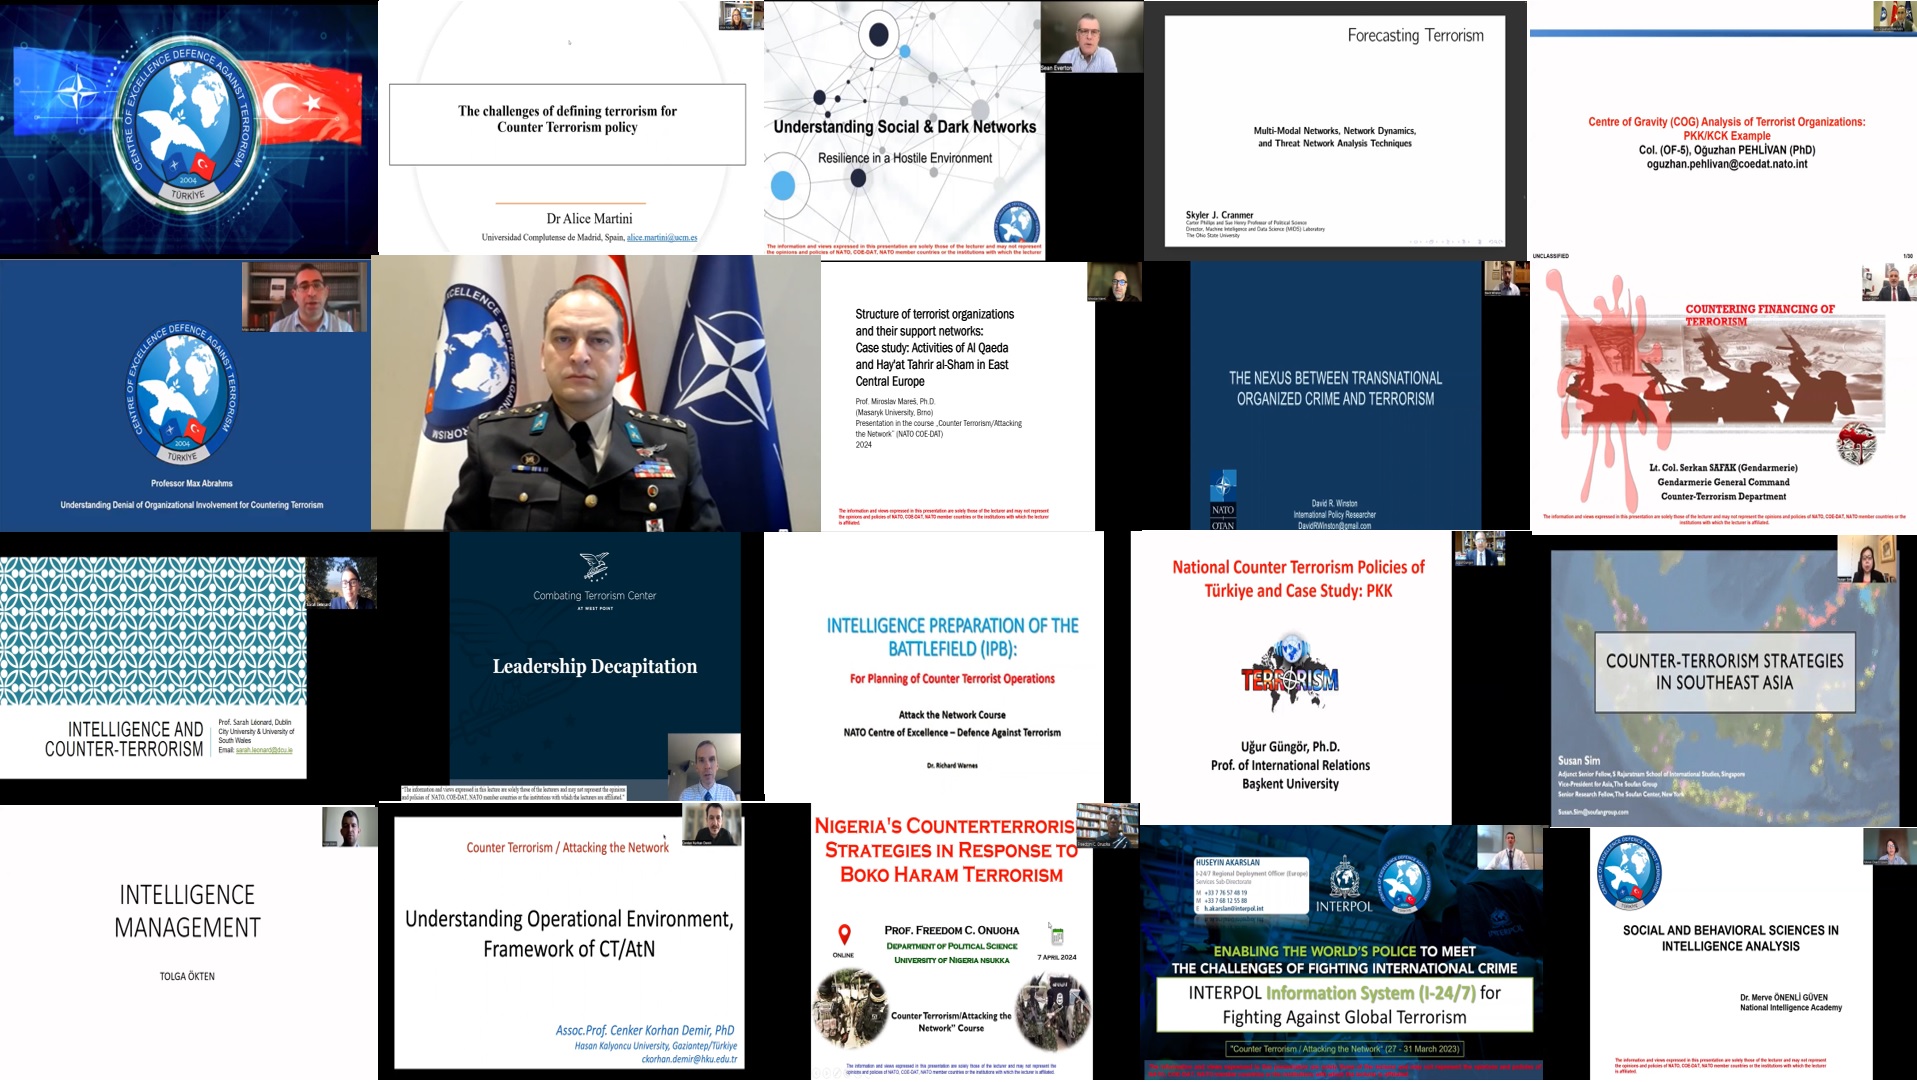 Counter Terrorism / Attack the Network Online Course was held on 01-05 April 2024 with the participation of 18 speakers from 7 countries and 62 participants from 27 countries.